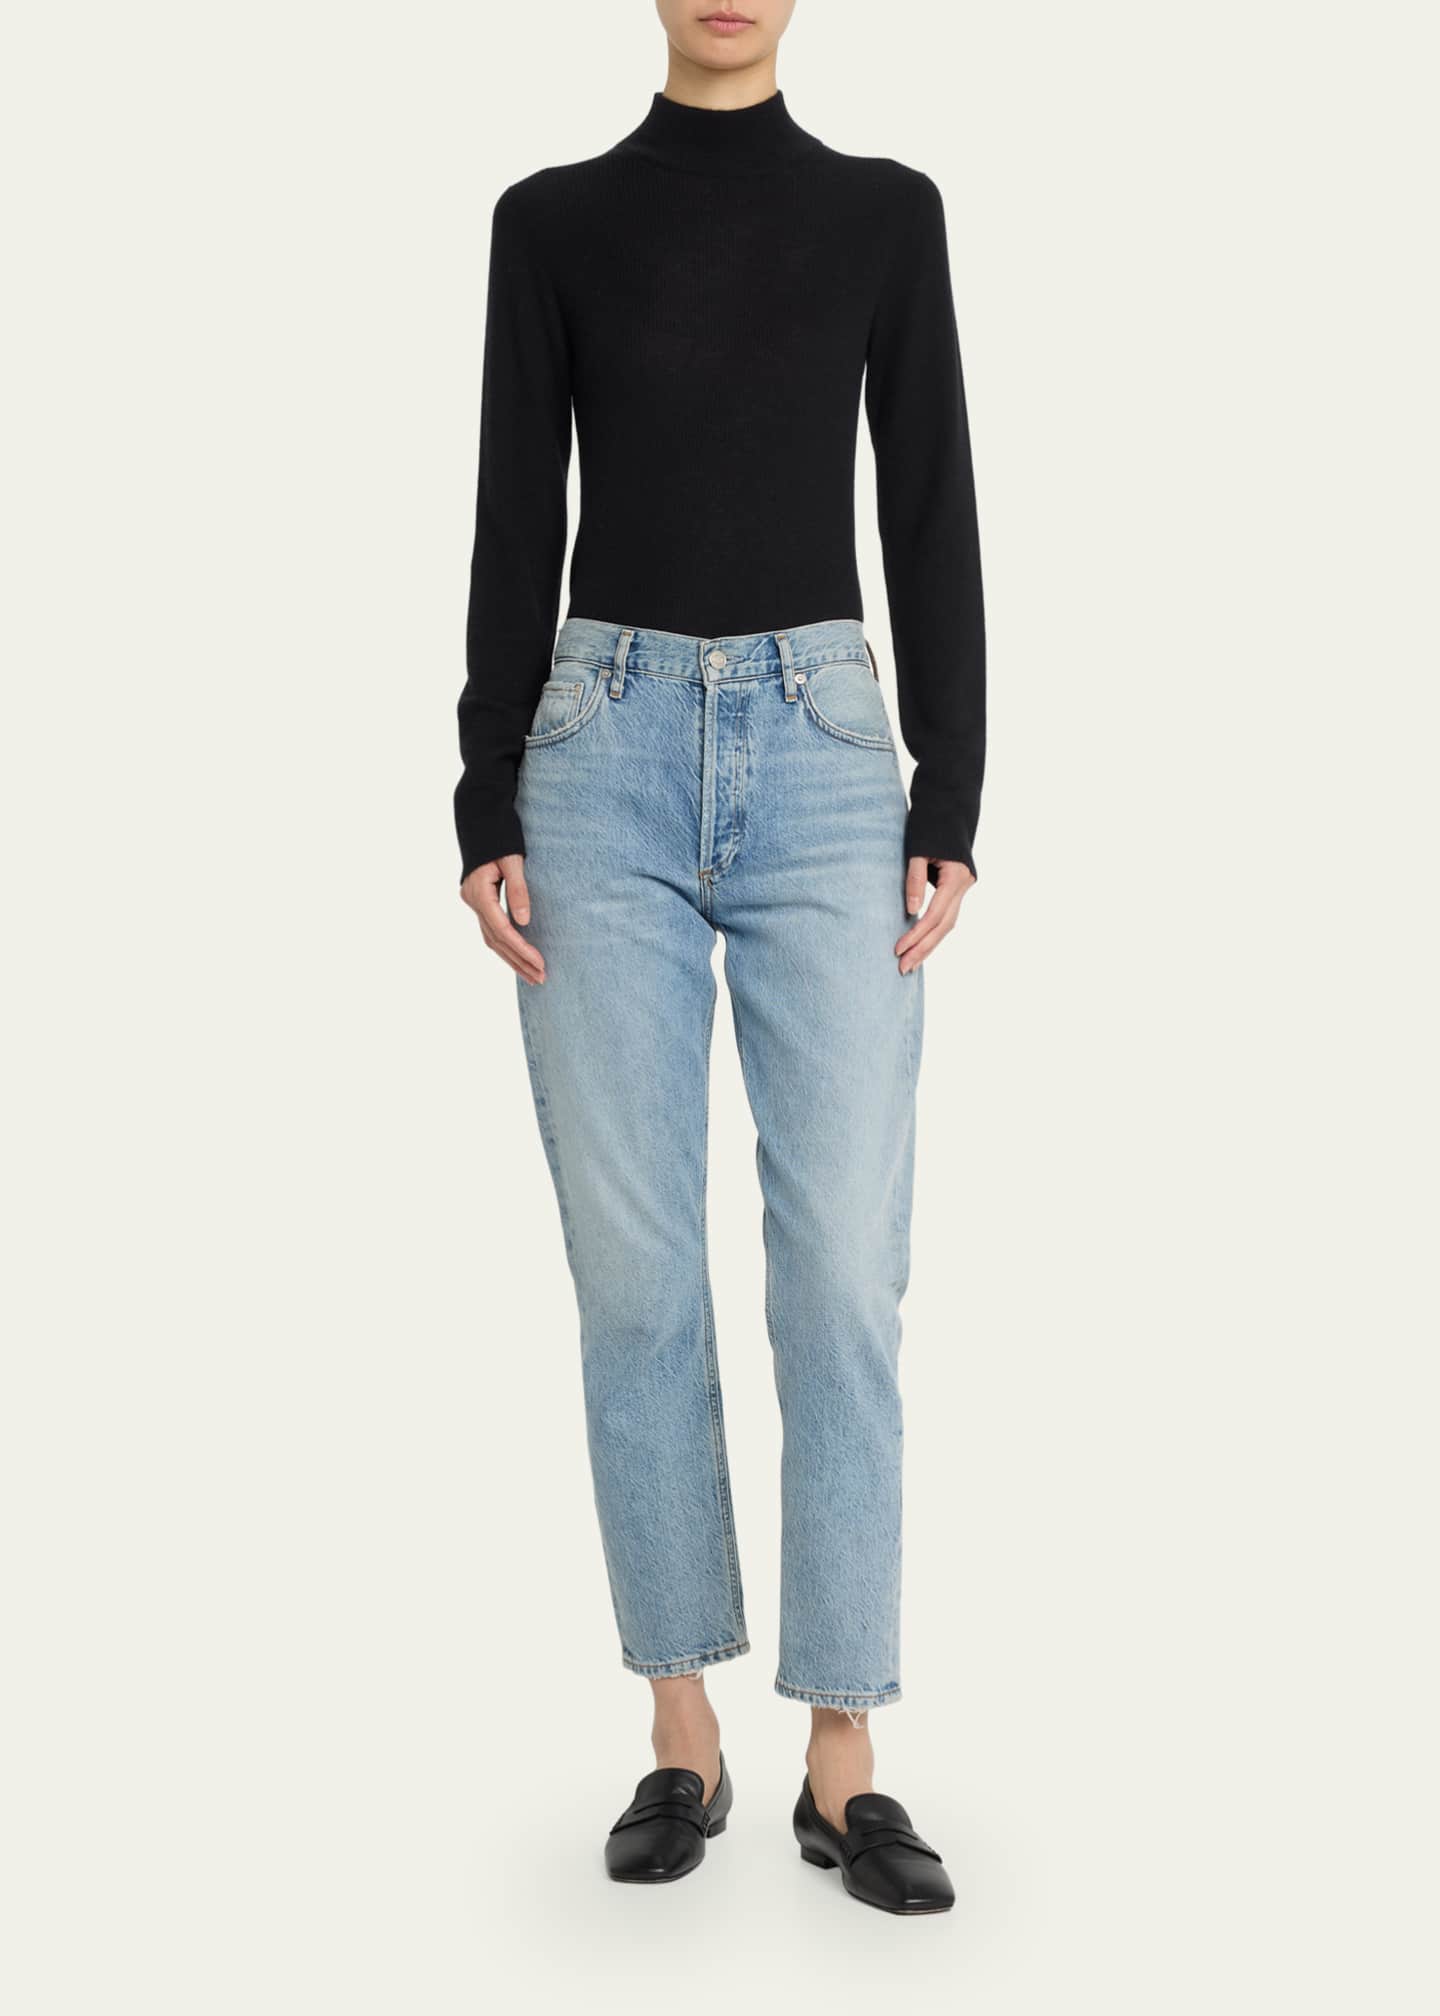 Guest in Residence Cashmere Base Layer Turtleneck Sweater - Bergdorf ...